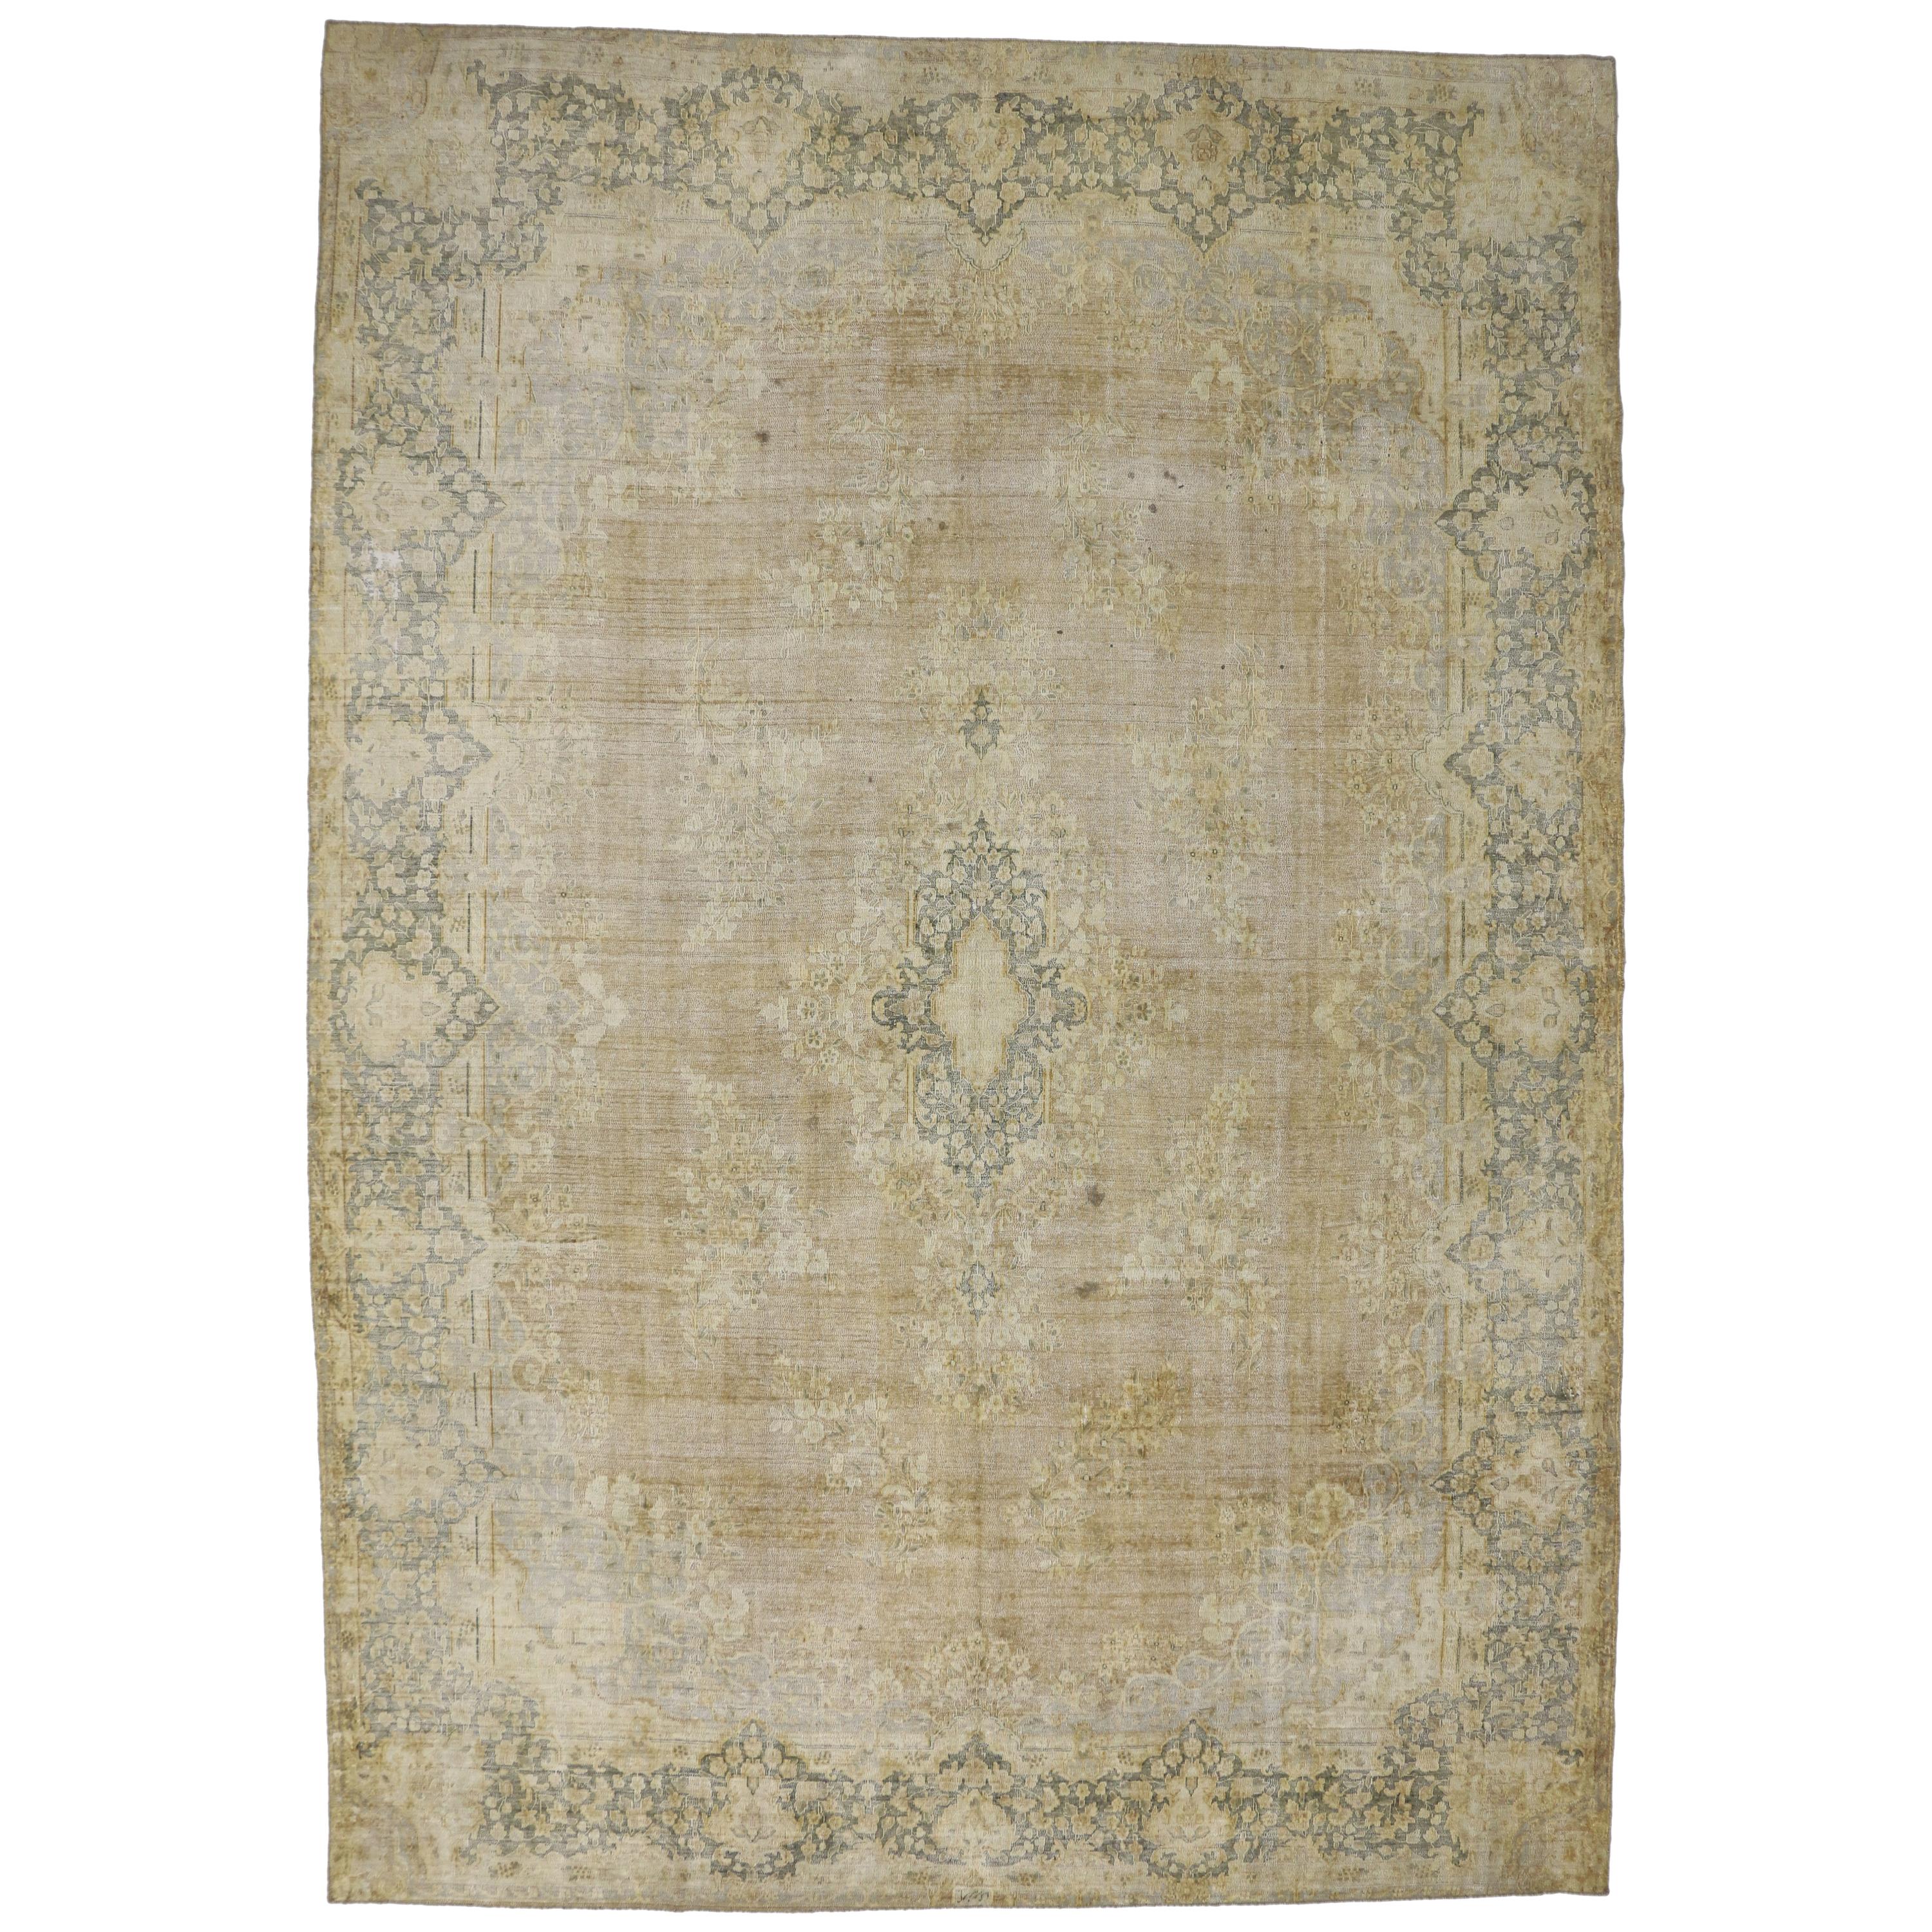 Distressed Vintage Turkish Oversized Rug with Shabby Chic Farmhouse Style